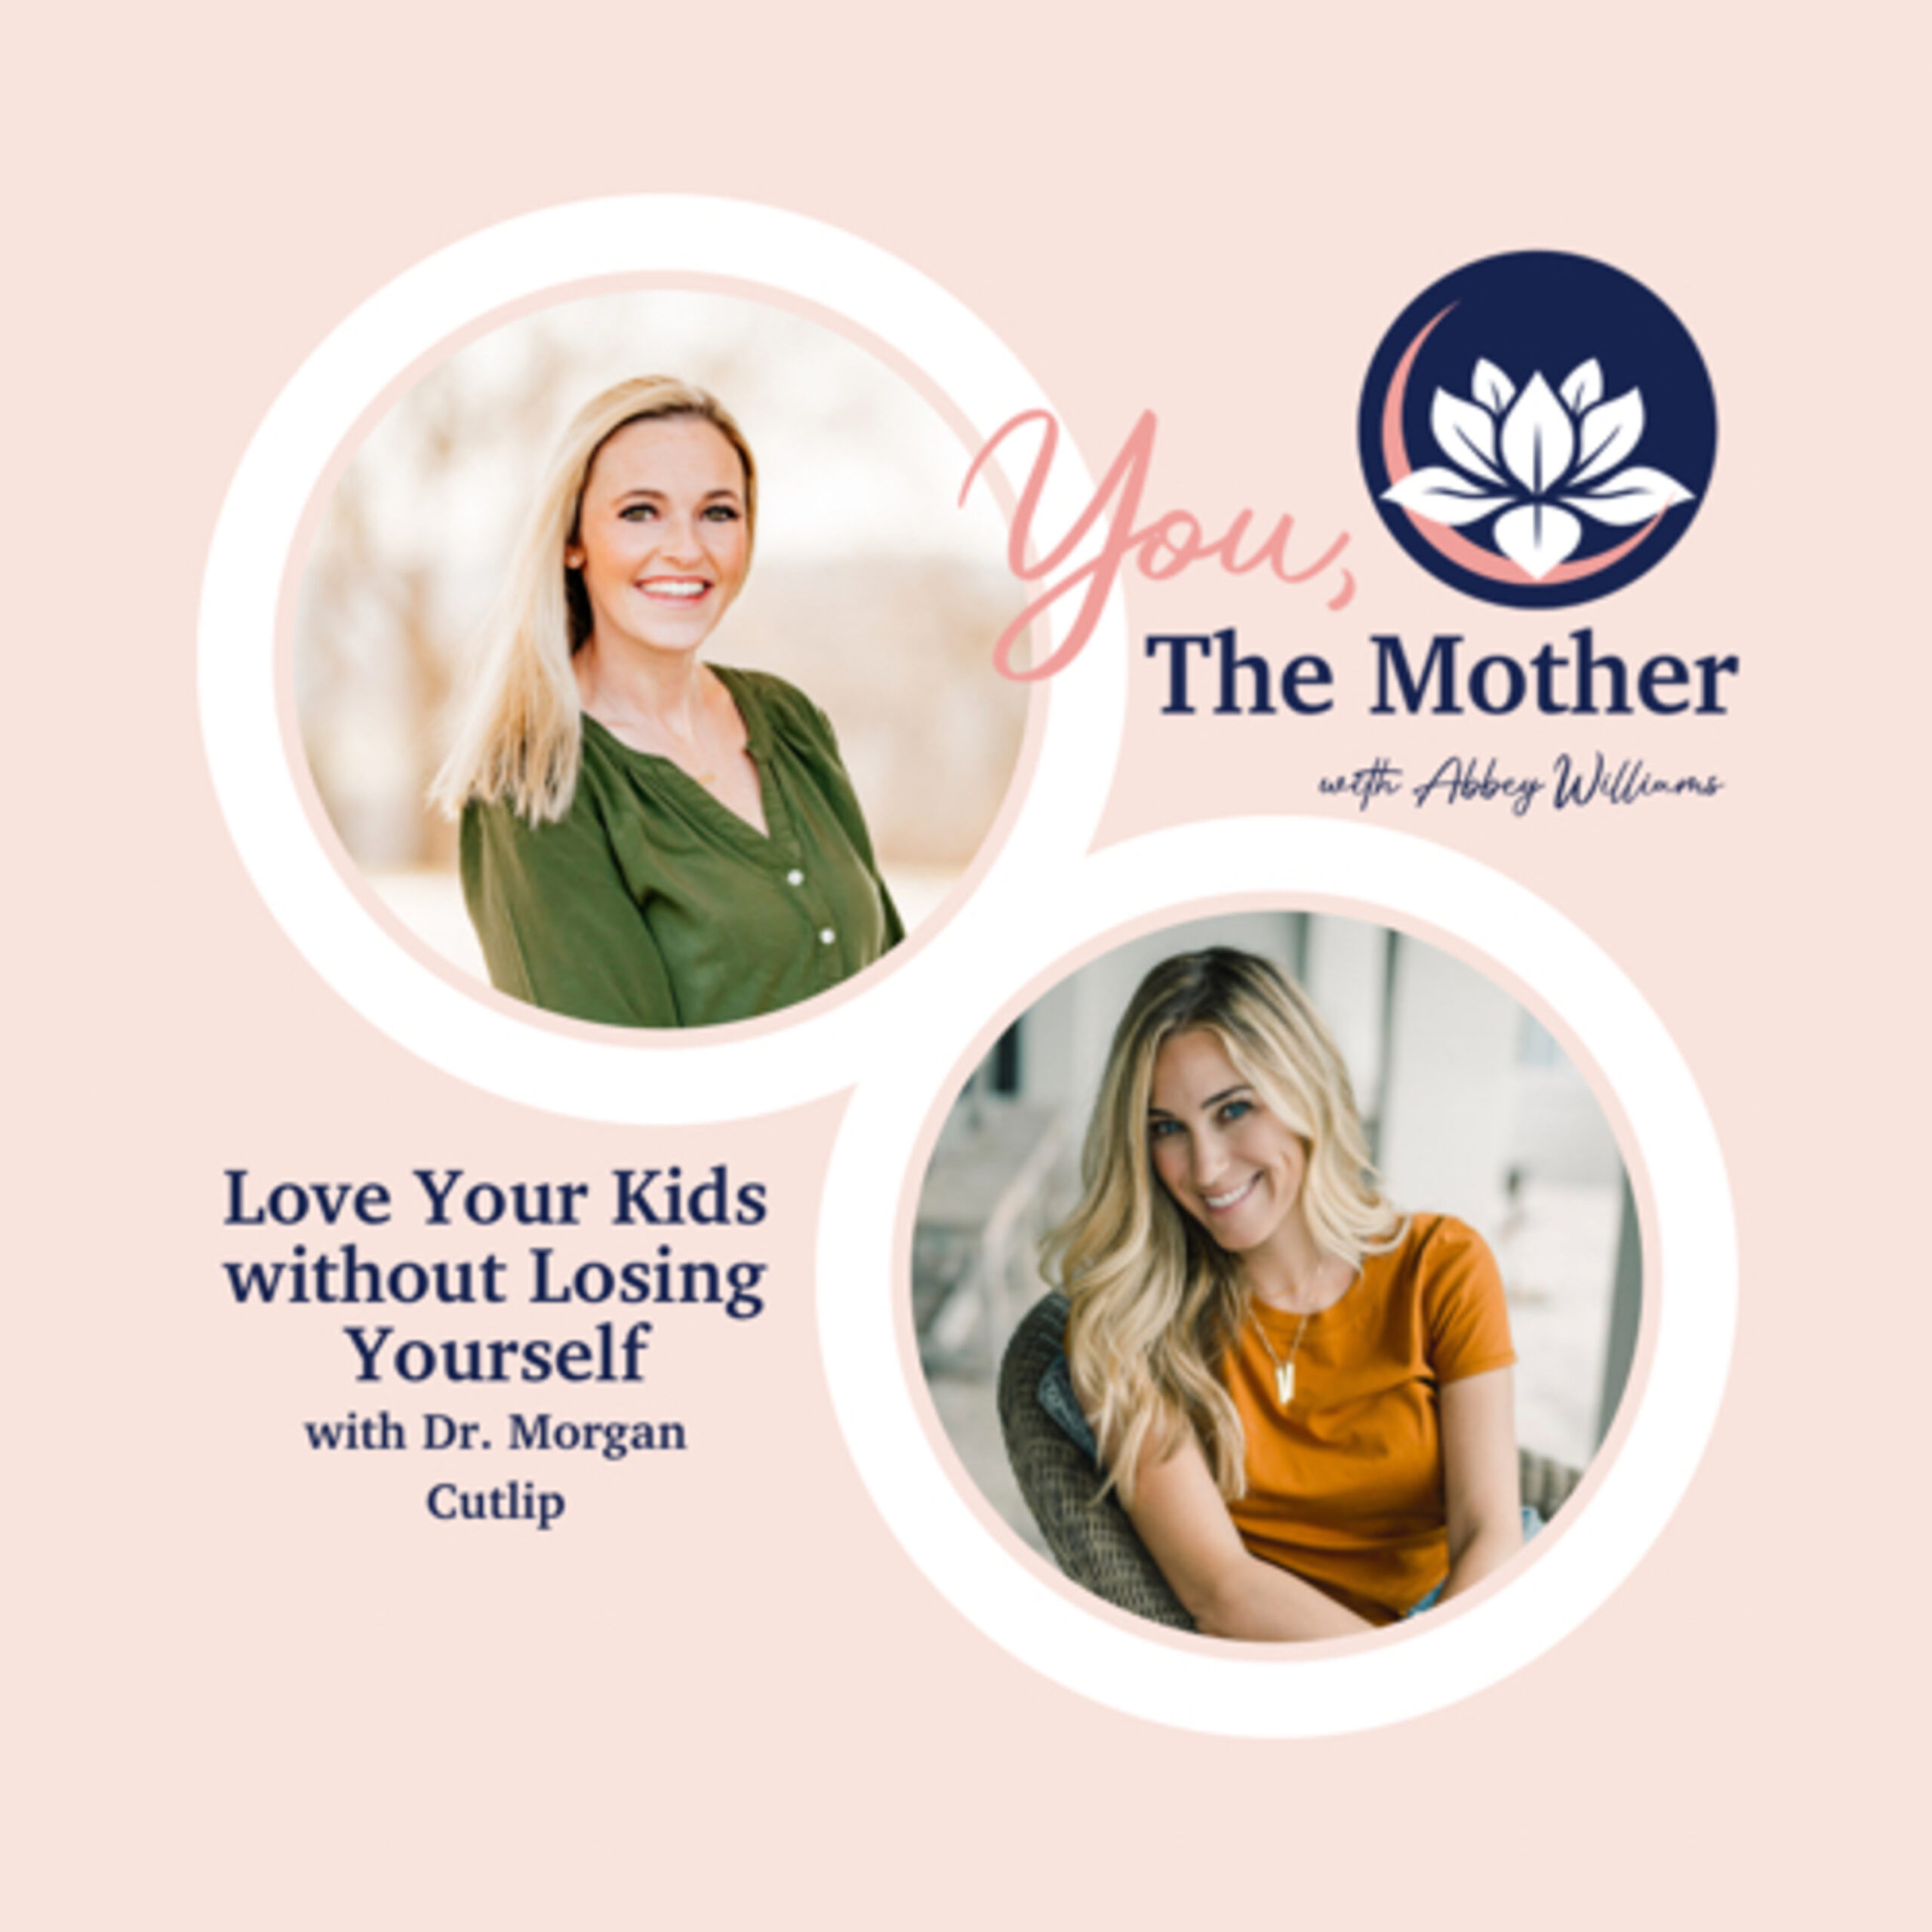 Love Your Kids Without Losing Yourself With Dr. Morgan Cutlip